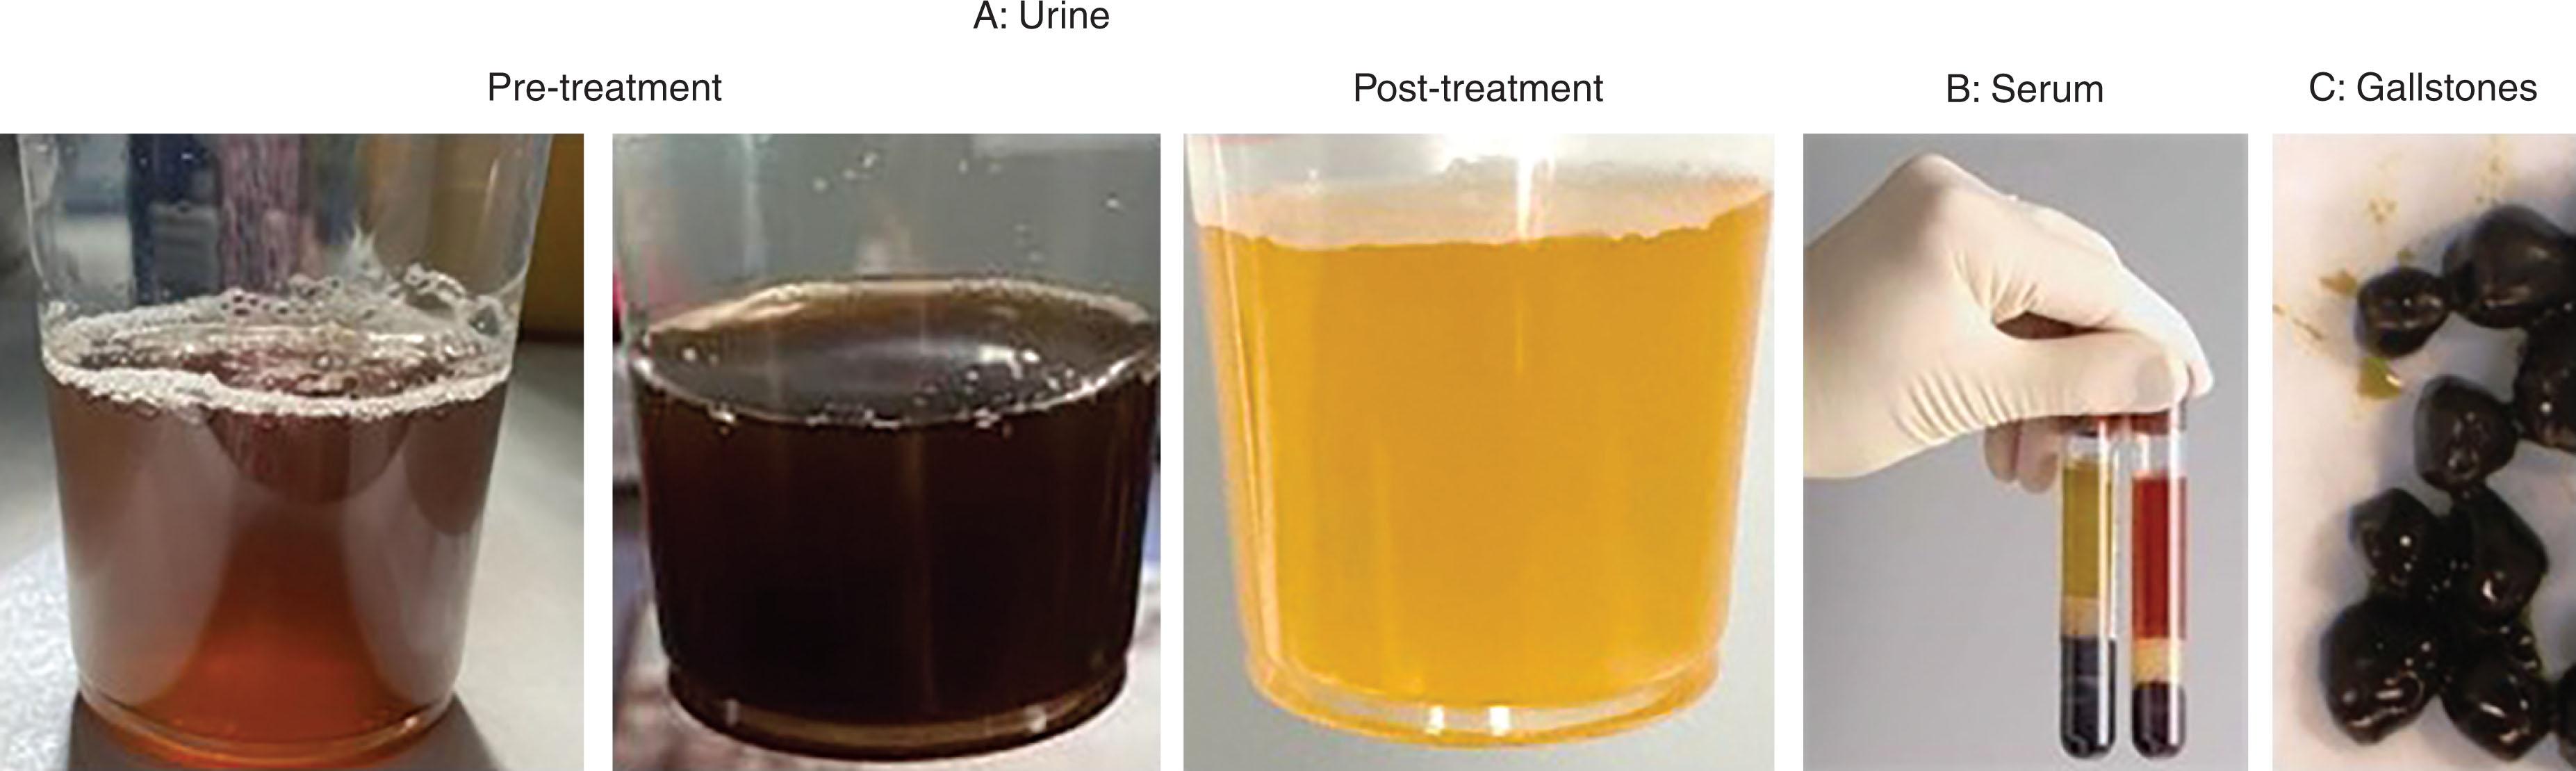 Figure 32.1, (A) Two urine samples from a patient with PNH with a large PNH clone, taken several days apart, prior to treatment. The urine color then normalized soon after starting ravulizumab. Note that since the darkening of the urine is “paroxysmal,” the normalization of the urine color is not sufficient to demonstrate an effect of any therapy– but rather the response is most rapidly demonstrated by the decrease in the lactate dehydrogenase (LDH). (B) Blood samples in a serum separator tube from a patient with PNH compared with the normal donor. Note the red color of the serum above the separator plug and the decreased size of the clotted red cells below the plug, consistent with anemia and intravascular hemolysis. (C) Symptomatic bilirubin gallstones from a cholecystectomy specimen in a patient with PNH on long-term treatment with a C5 inhibitor. Stone formation is a consequence of chronic extravascular hemolysis of various etiologies and is seen in some patients on eculizumab or ravulizumab. This complication was not seen historically in untreated patients with PNH in whom the hemolysis is largely intravascular. The reason for this is that in intravascular hemolysis, free hemoglobin is largely excreted in the urine and is not broken down to bilirubin, whereas for extravascular hemolysis, hemoglobin is broken down in the cells of the reticuloendothelial system, resulting in hyperbilirubinemia. Likewise, patients with PNH who are treated with C5 inhibition can develop iron overload, as seen in other forms of extravascular hemolysis, but this is not typically seen in intravascular hemolysis where iron is lost in the urine.